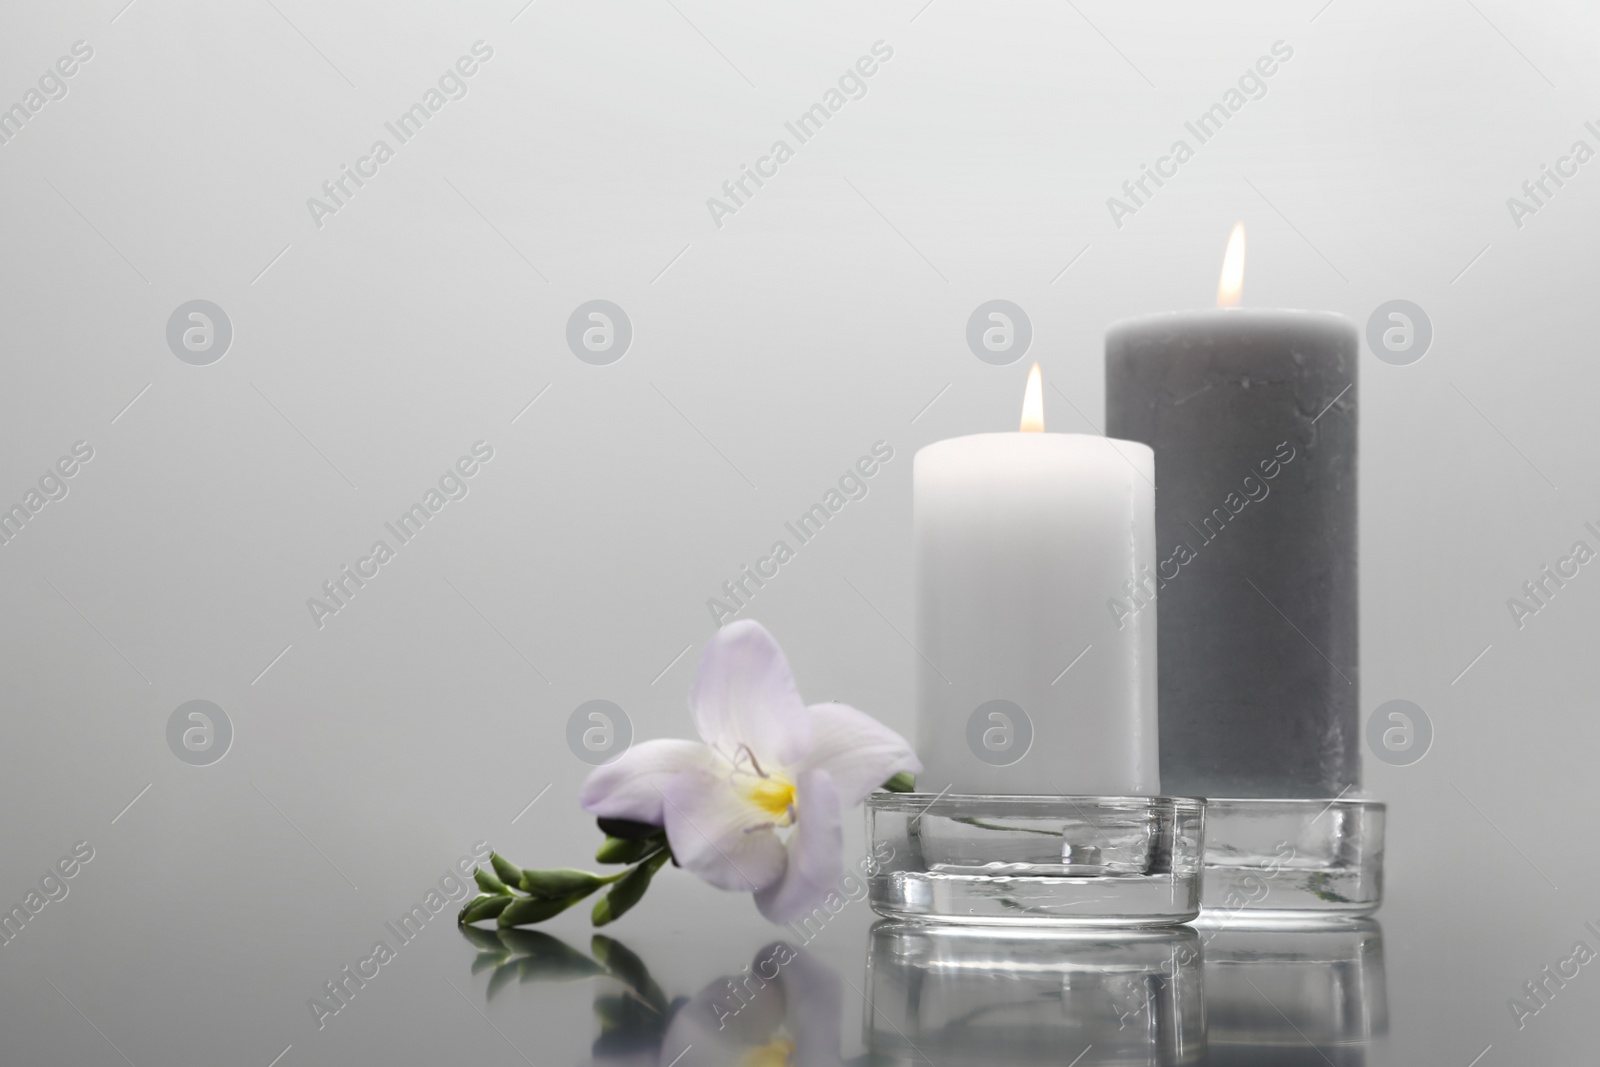 Photo of Wax candles in glass holders and flower on table against light background. Space for text